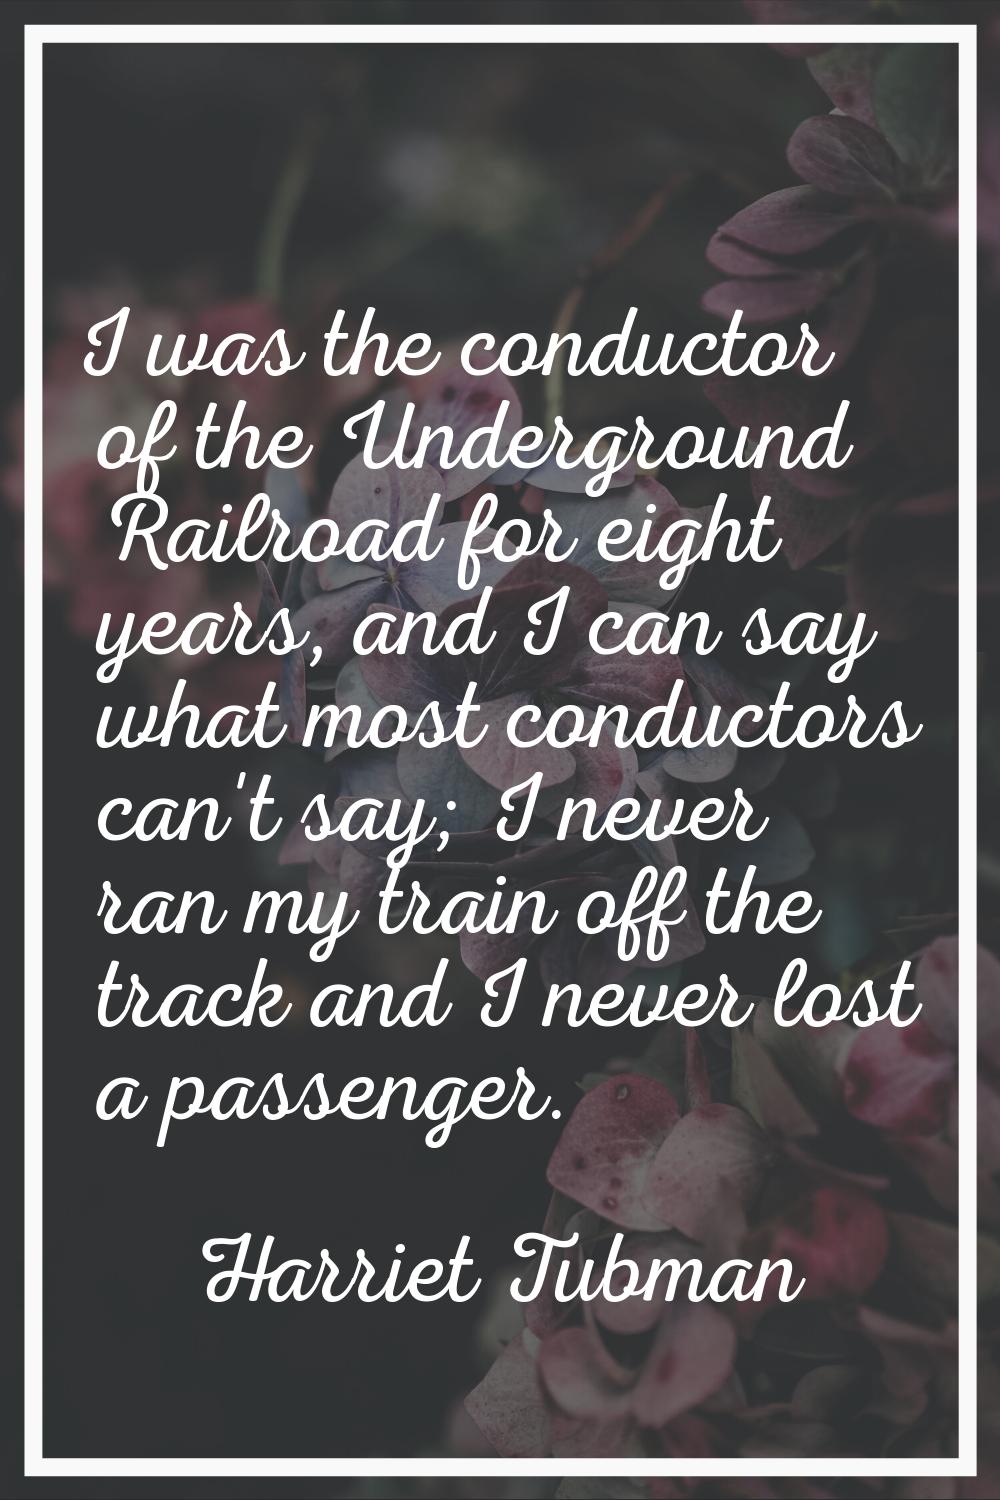 I was the conductor of the Underground Railroad for eight years, and I can say what most conductors